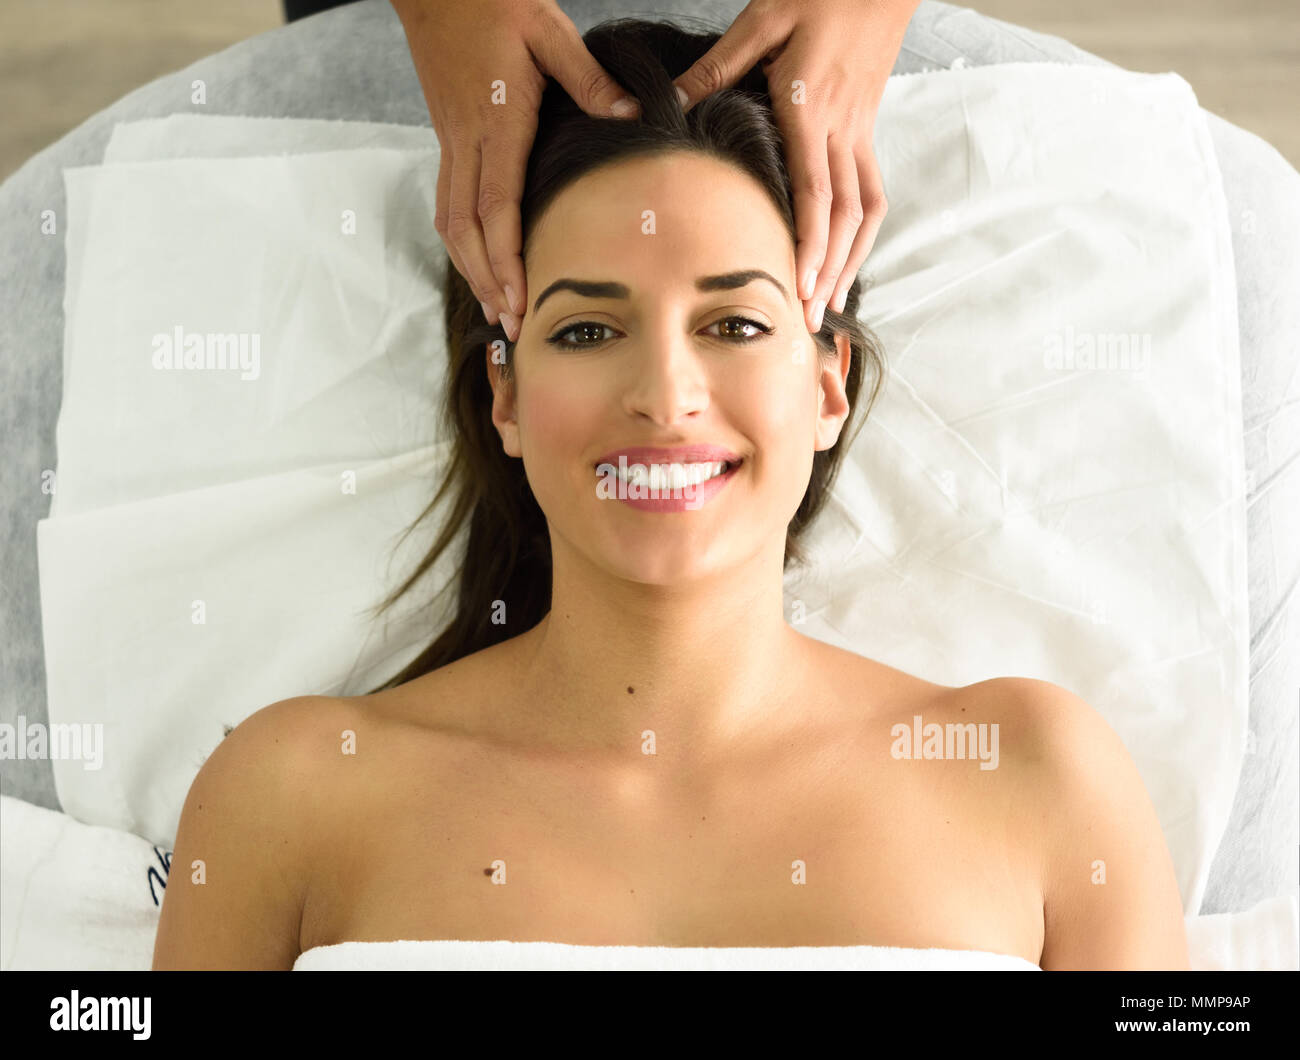 Top View Of Young Caucasian Smiling Woman Receiving A Head Massage In A